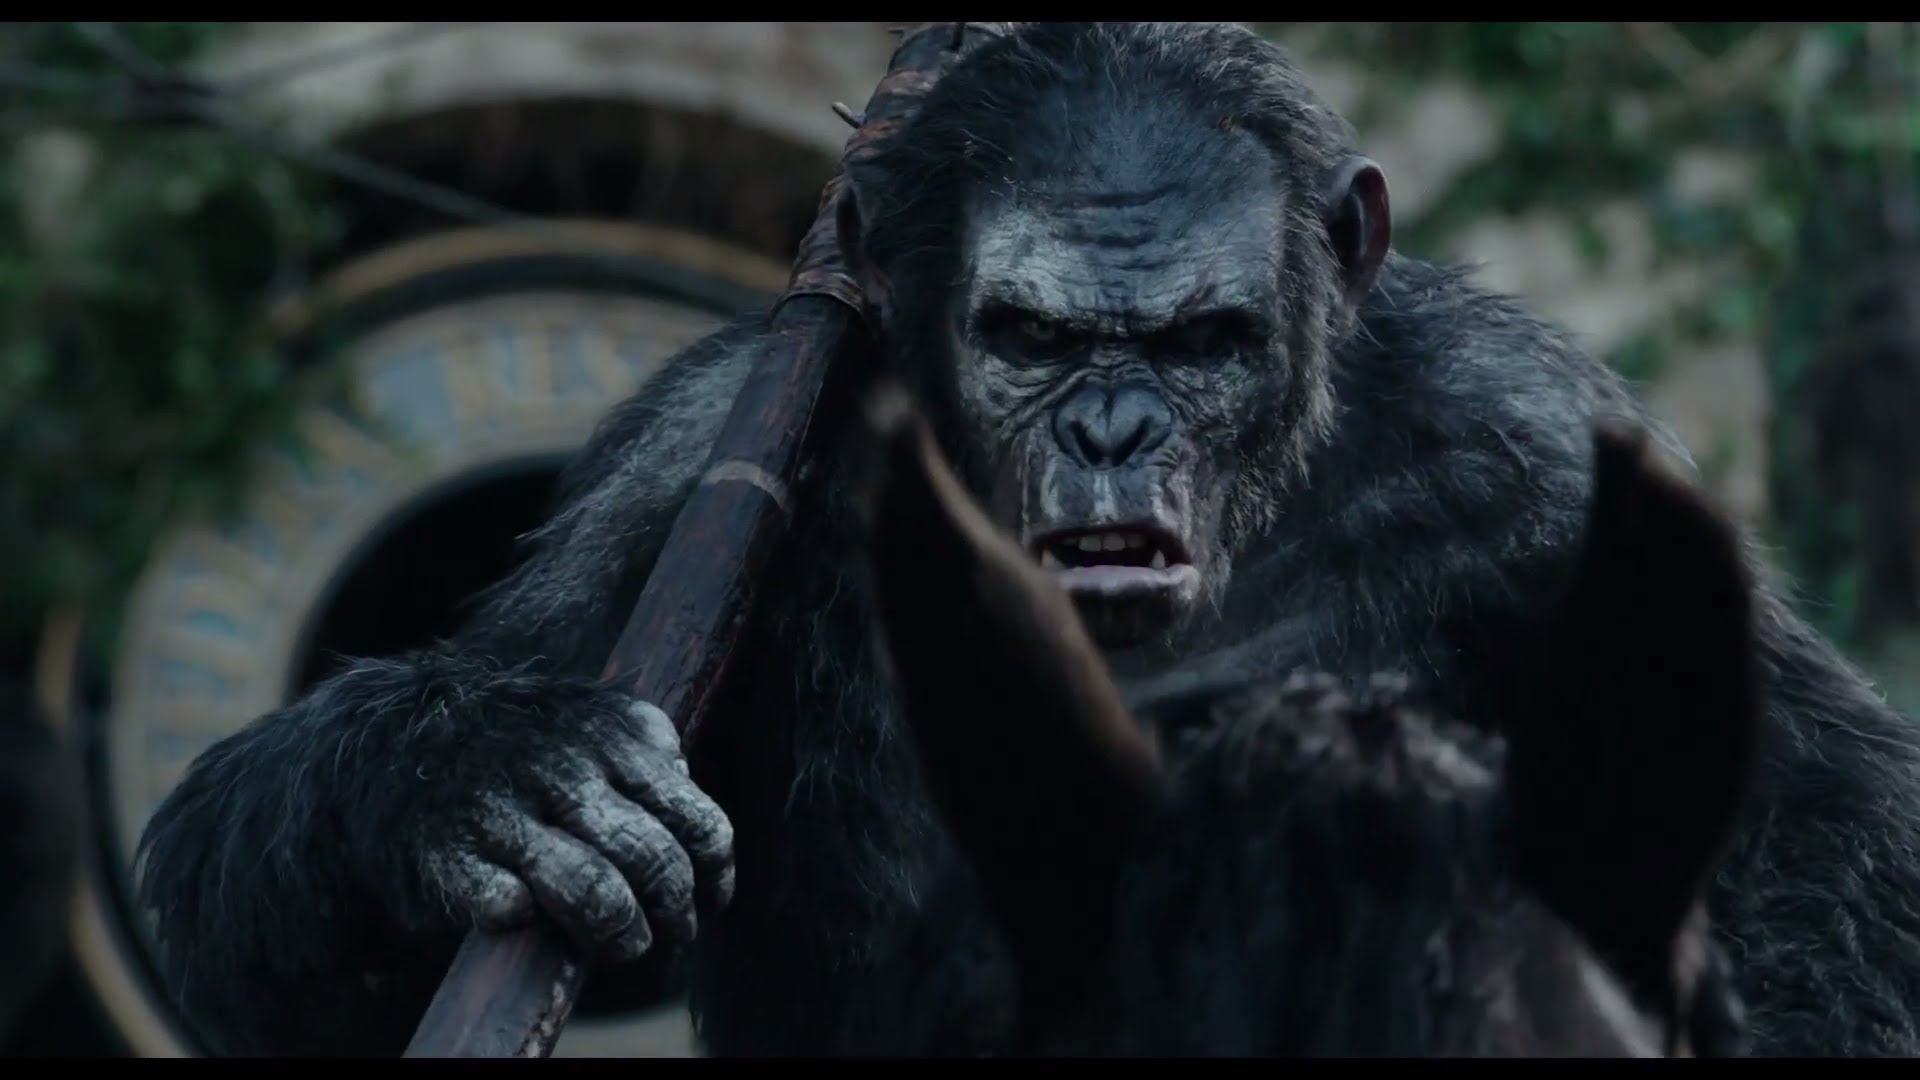 Dawn of the Planet of the Apes – Final Trailer (HD)